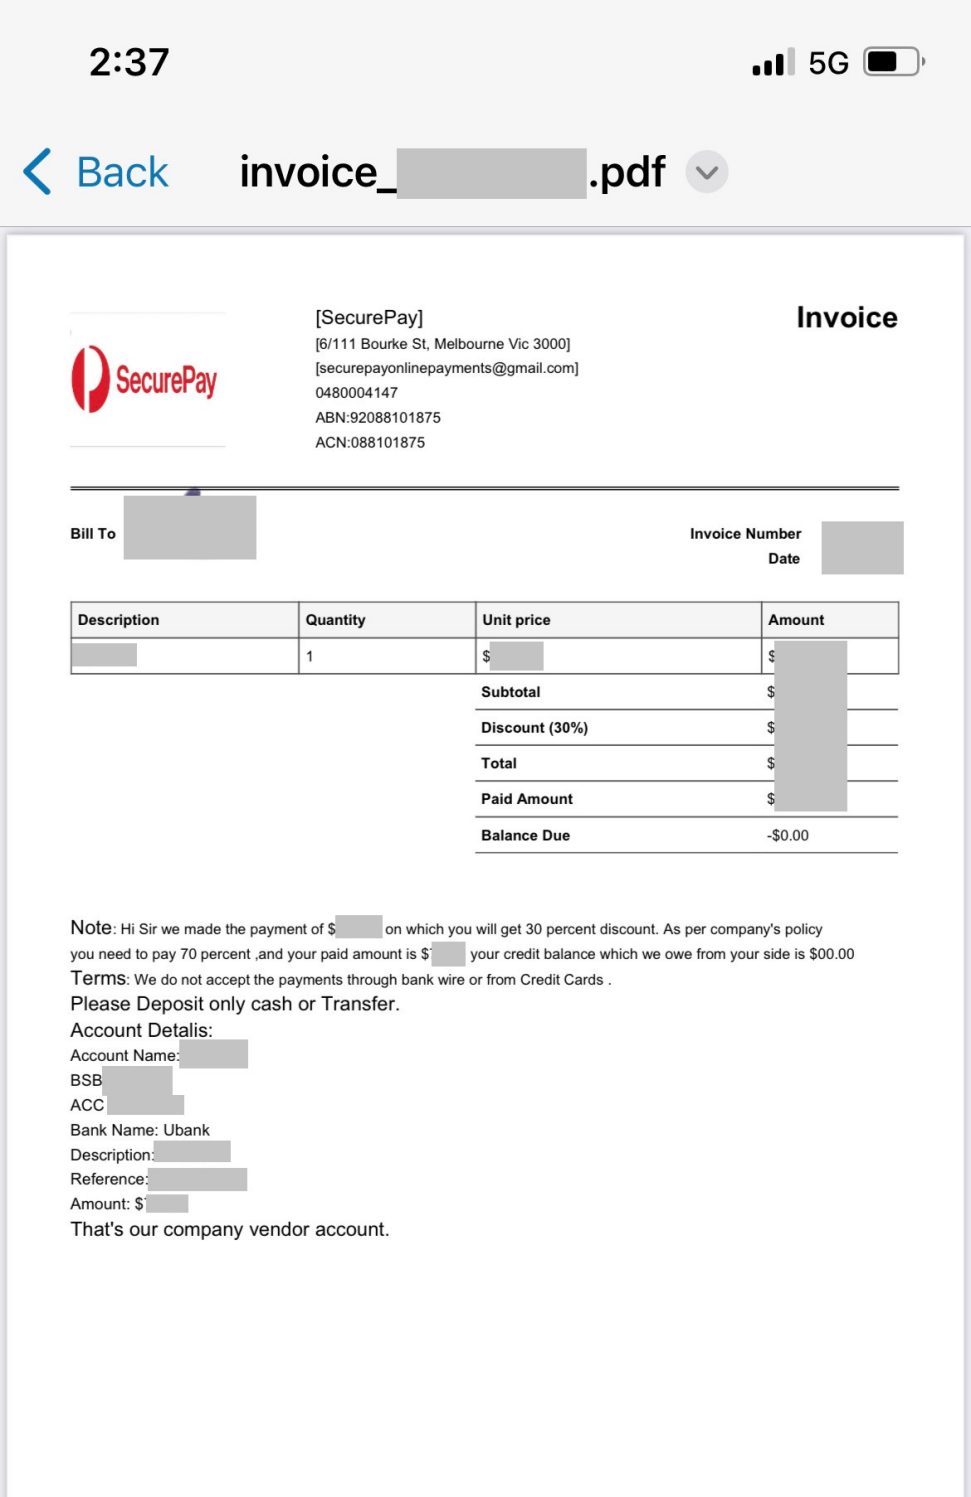 Screenshot of a pdf is shown with SecurePay logo and some transactional details on a table. The name, account details, transactional values are masked.
However it shows that a 30% discount is offered and that the remaining balance has to be paid to a bank account.